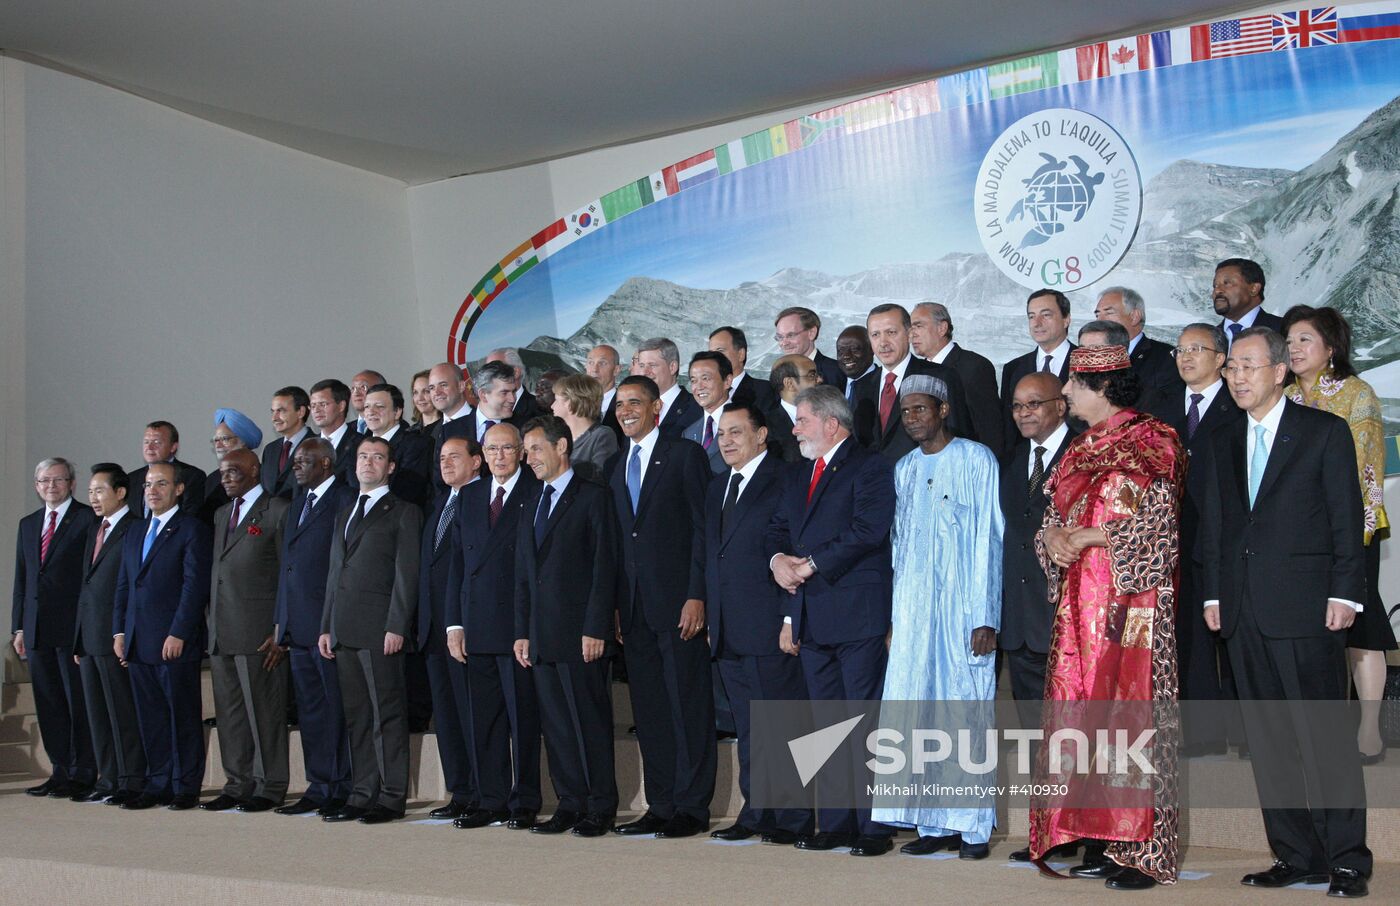 Dinner hosted by Italian President for G8 summit participants